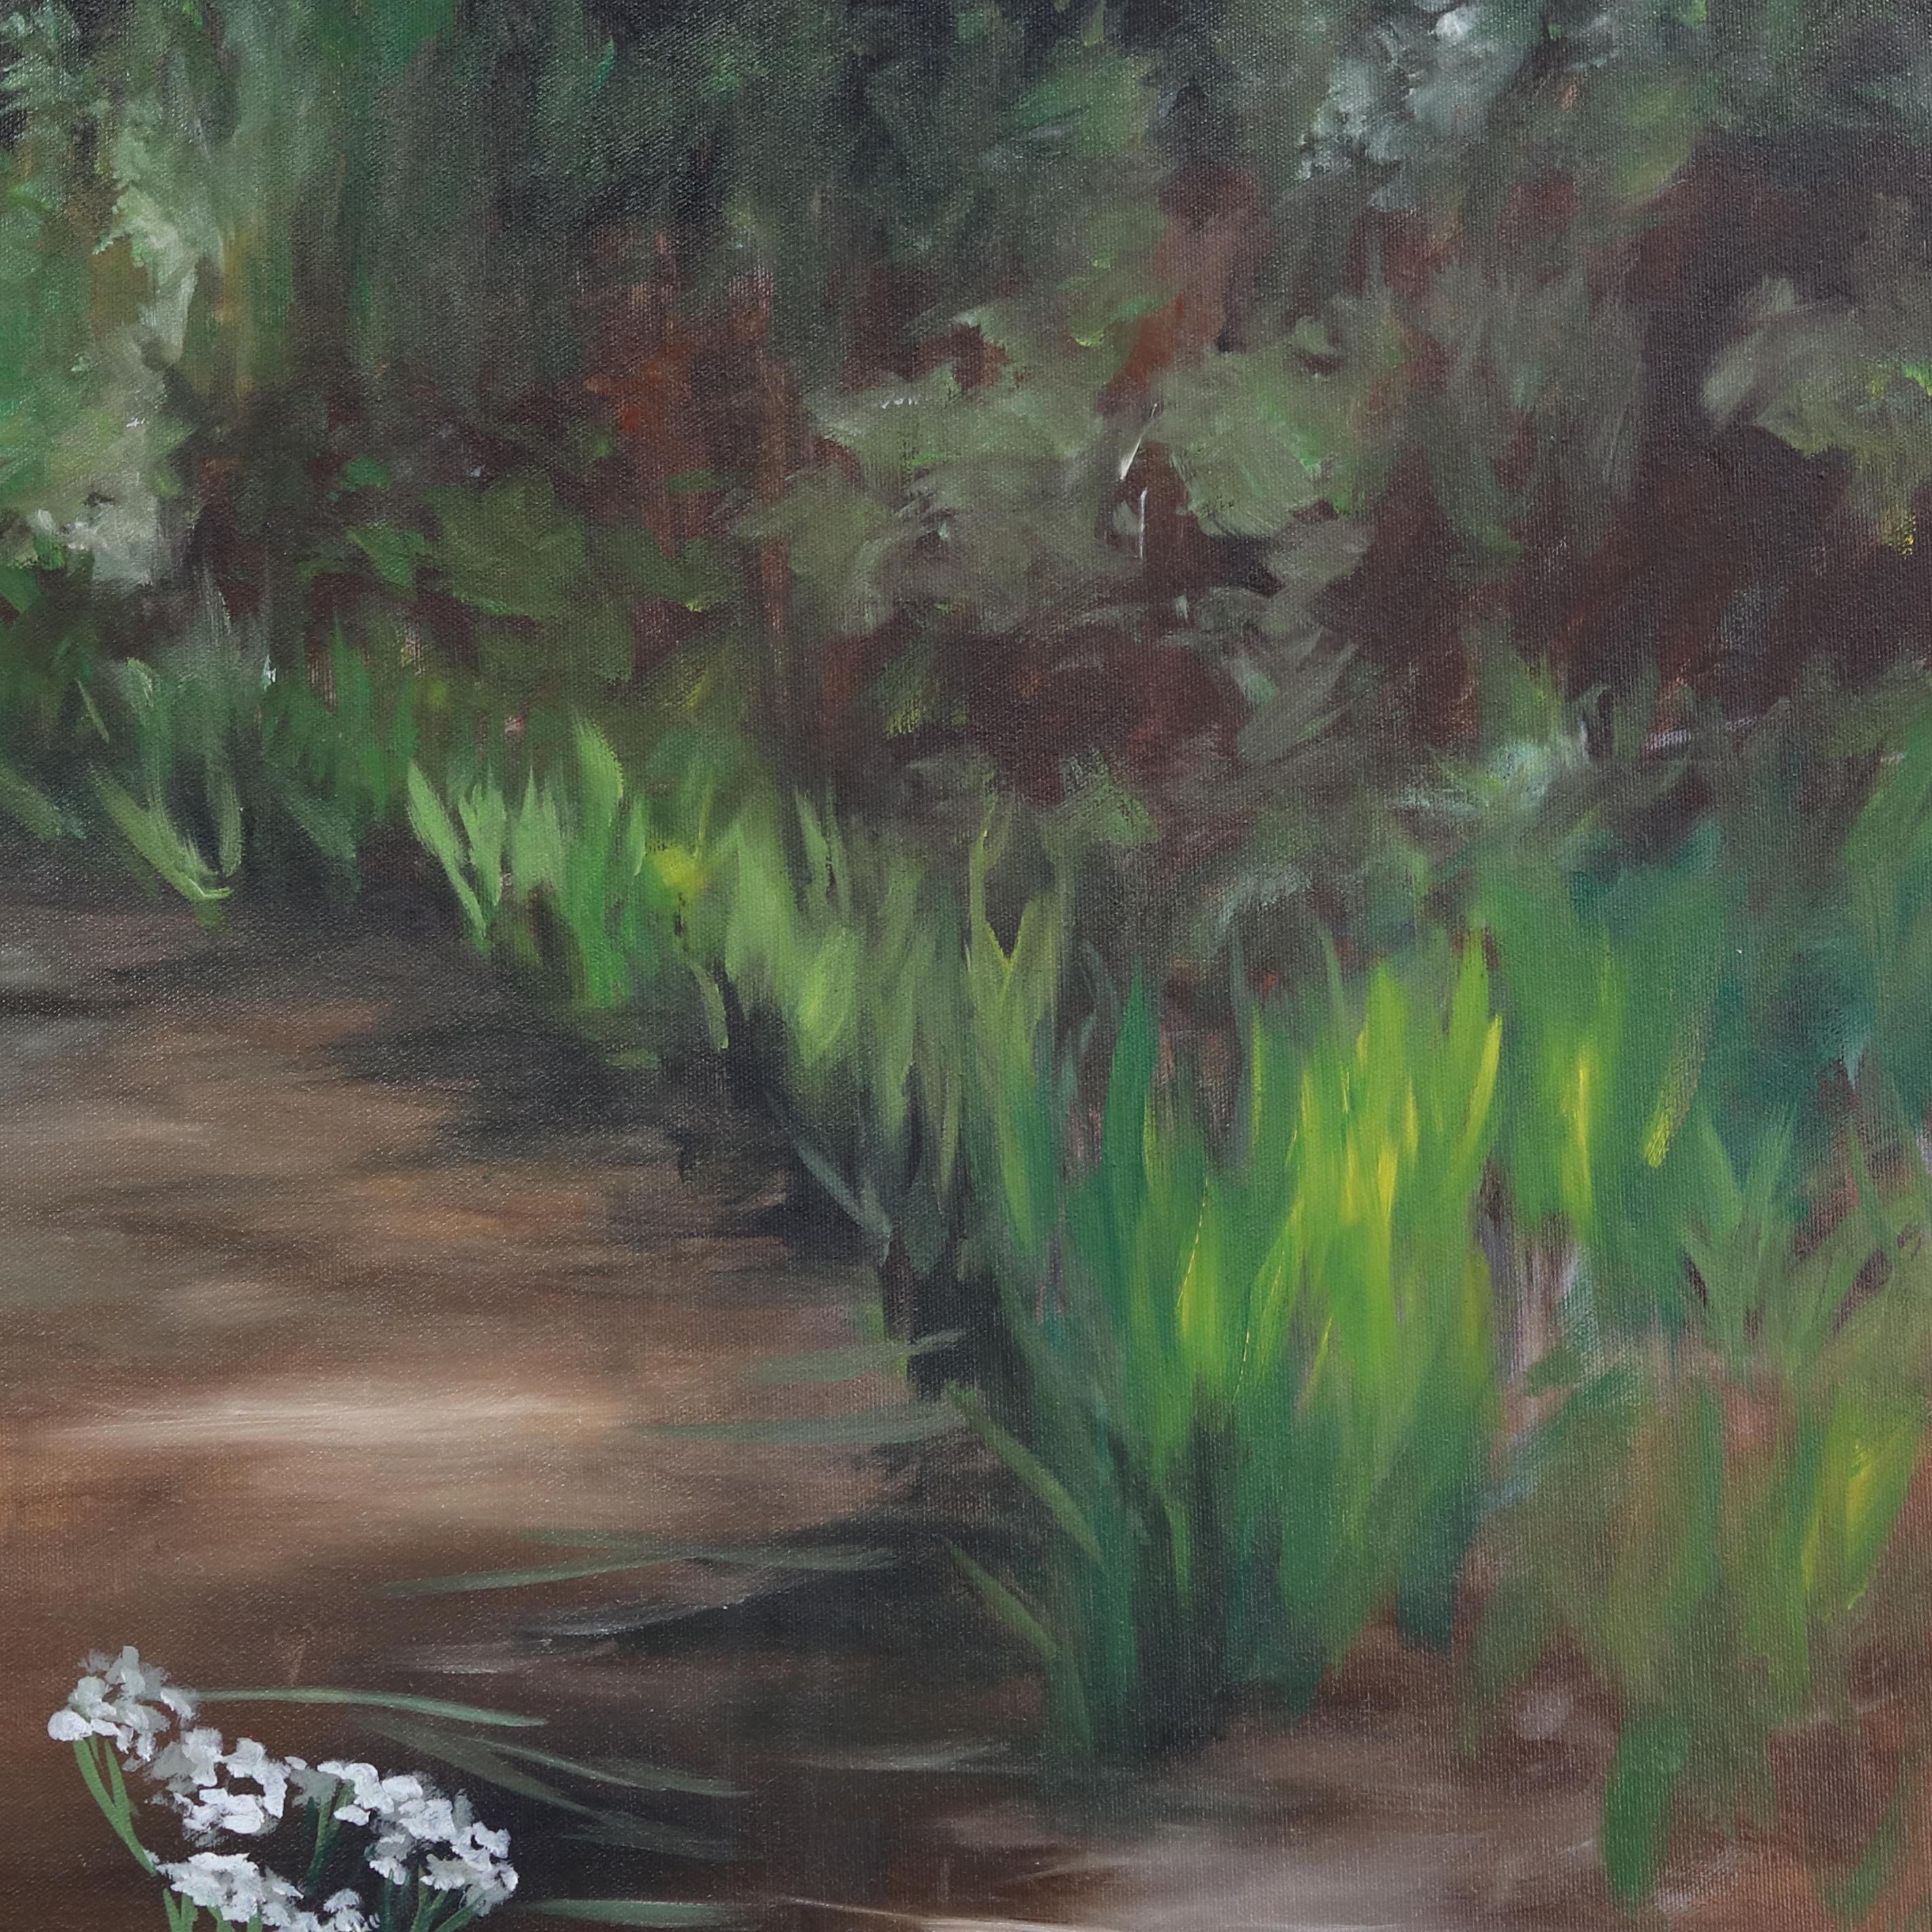 Amber Young's creative focus centers on nature, with a particular emphasis on the intricate beauty of forests, flowers, and water reflections.Young's artistic journey is deeply rooted in her connection to the rural landscape of Hampton, New